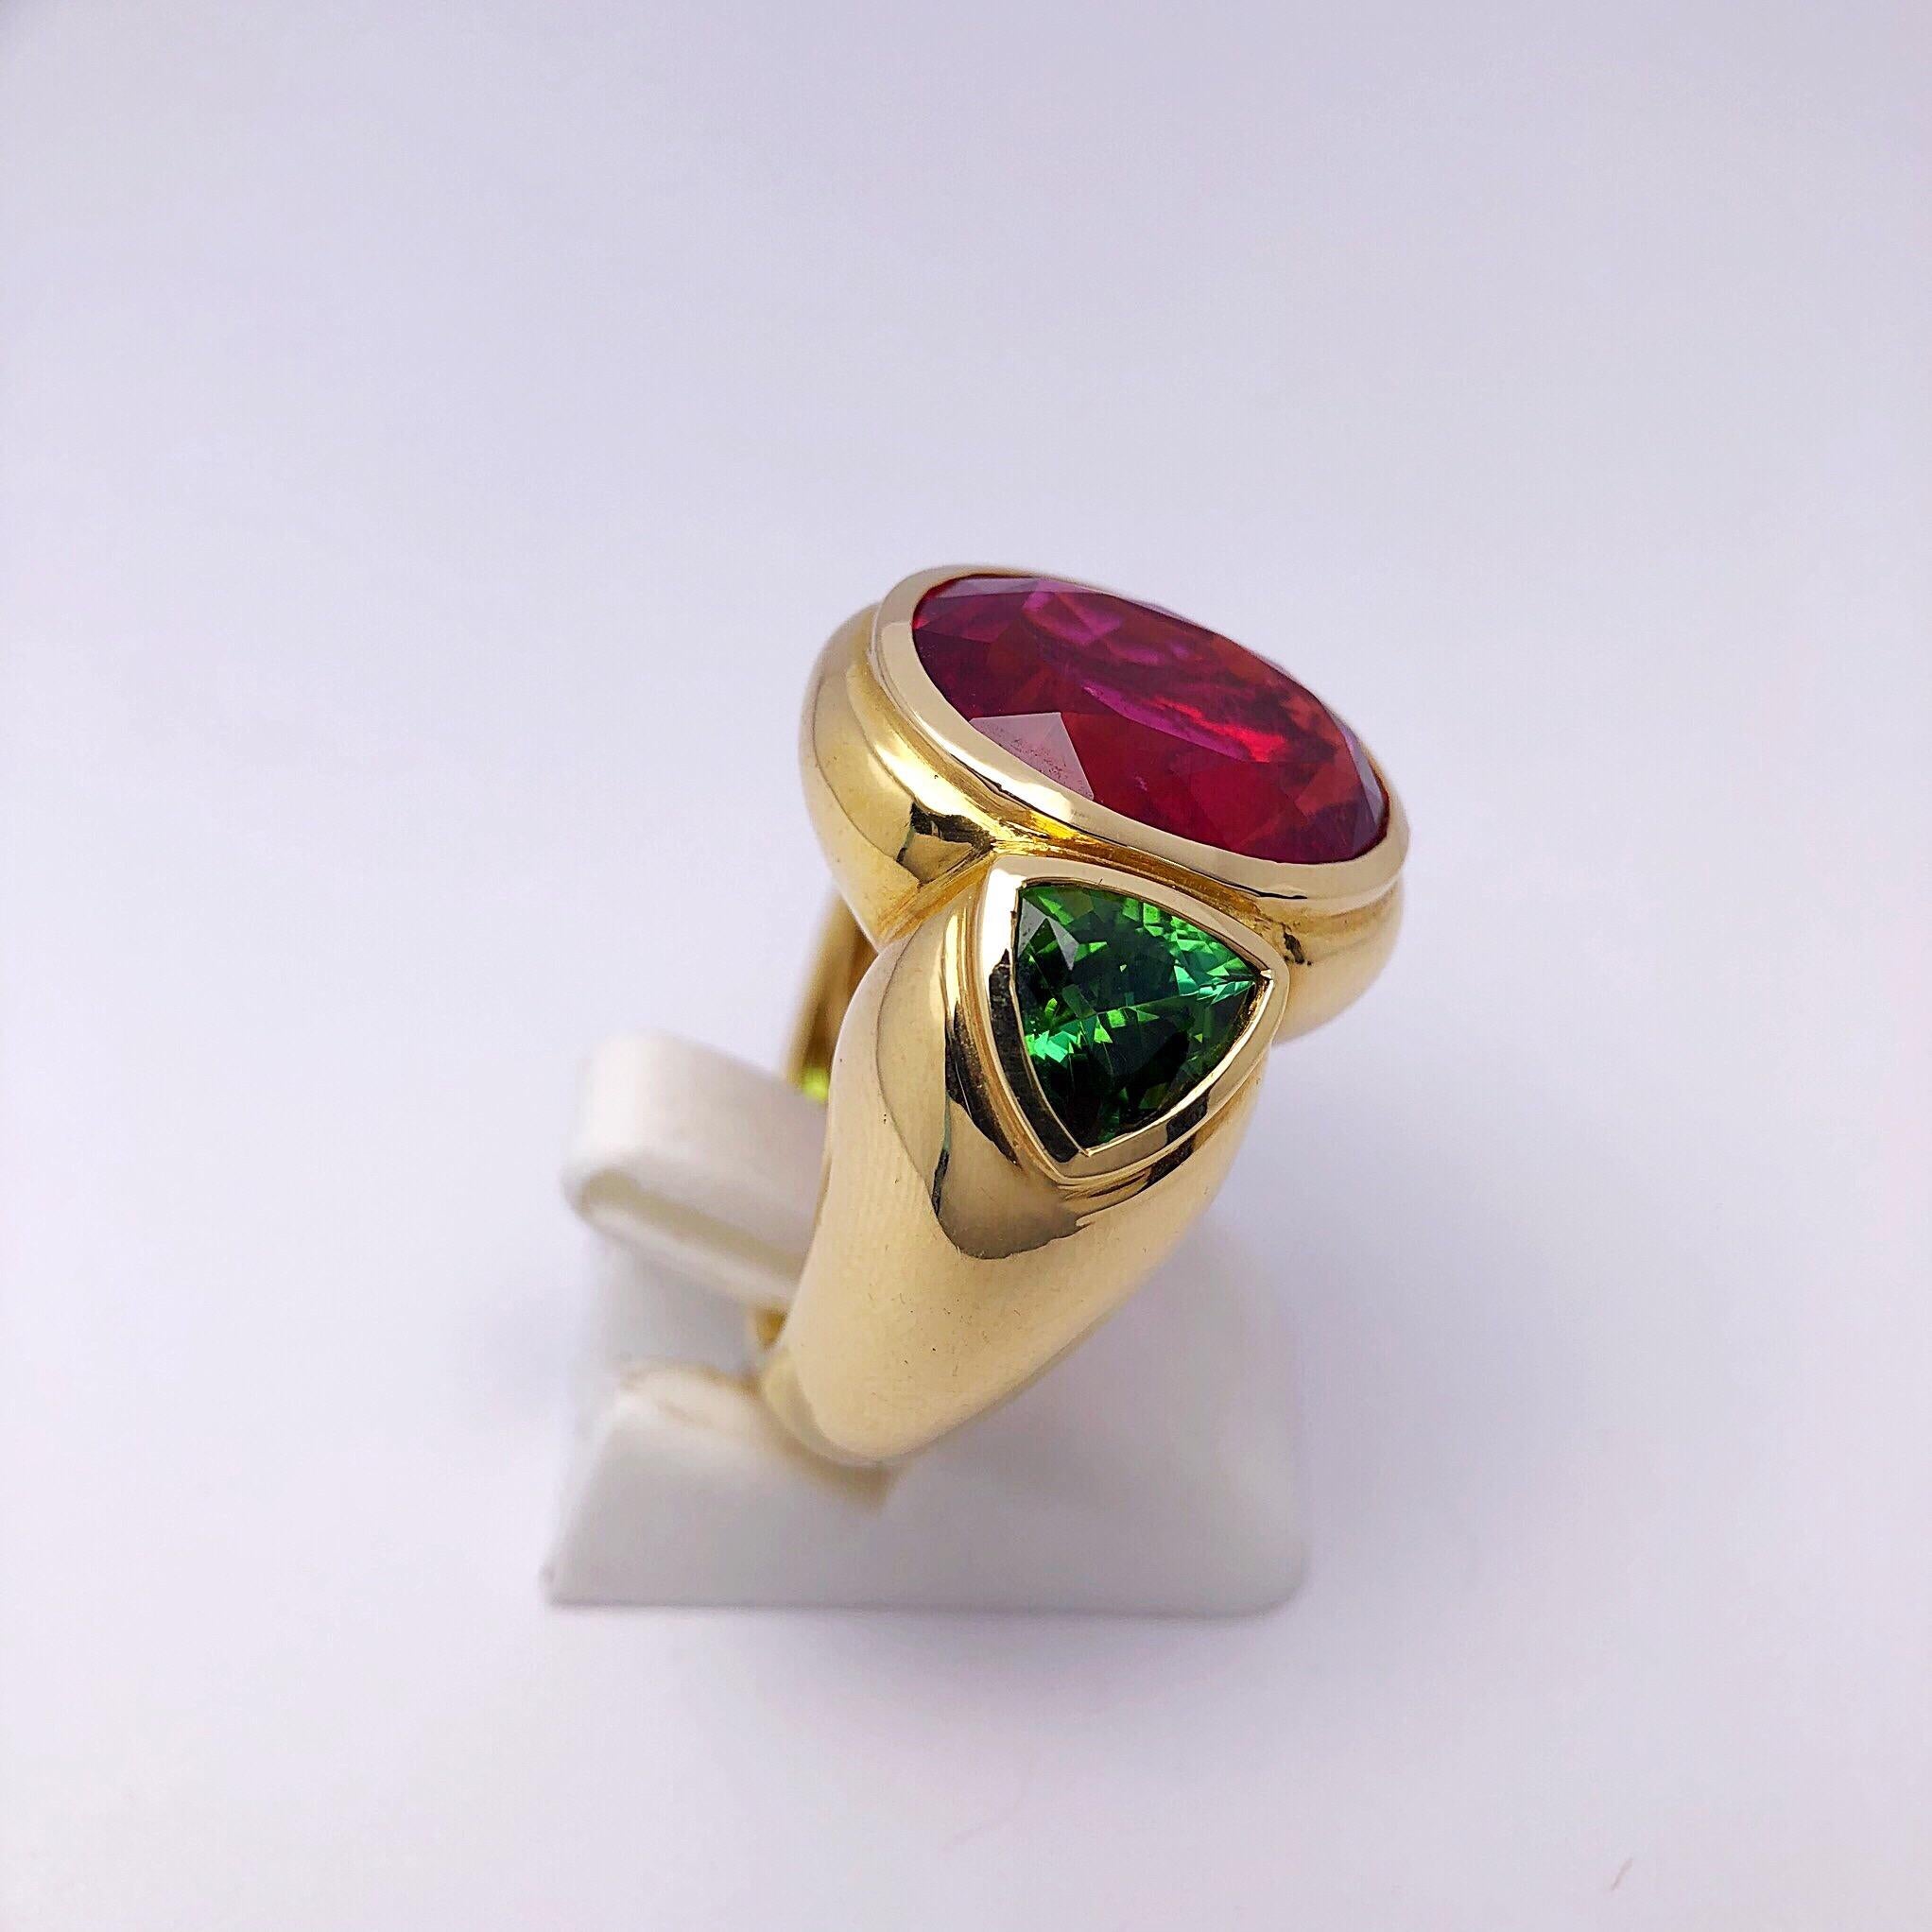 Contemporary Cellini Jewelers 18KT Gold, 7.27Ct. Rubellite and 2.38Ct. Green Tourmaline Ring For Sale